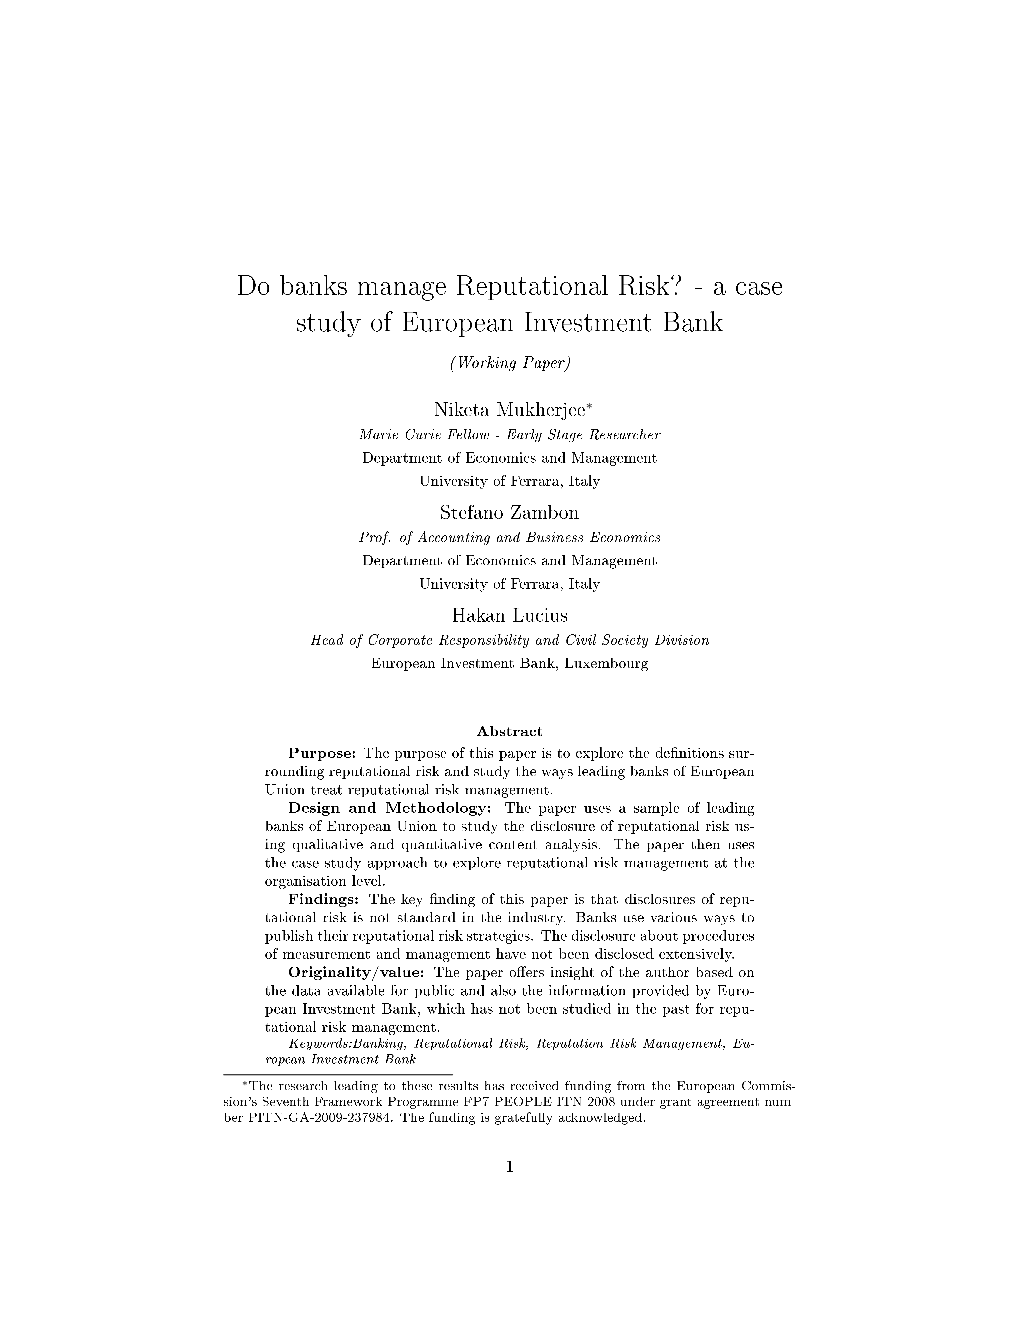 Do Banks Manage Reputational Risk? - a Case Study of European Investment Bank